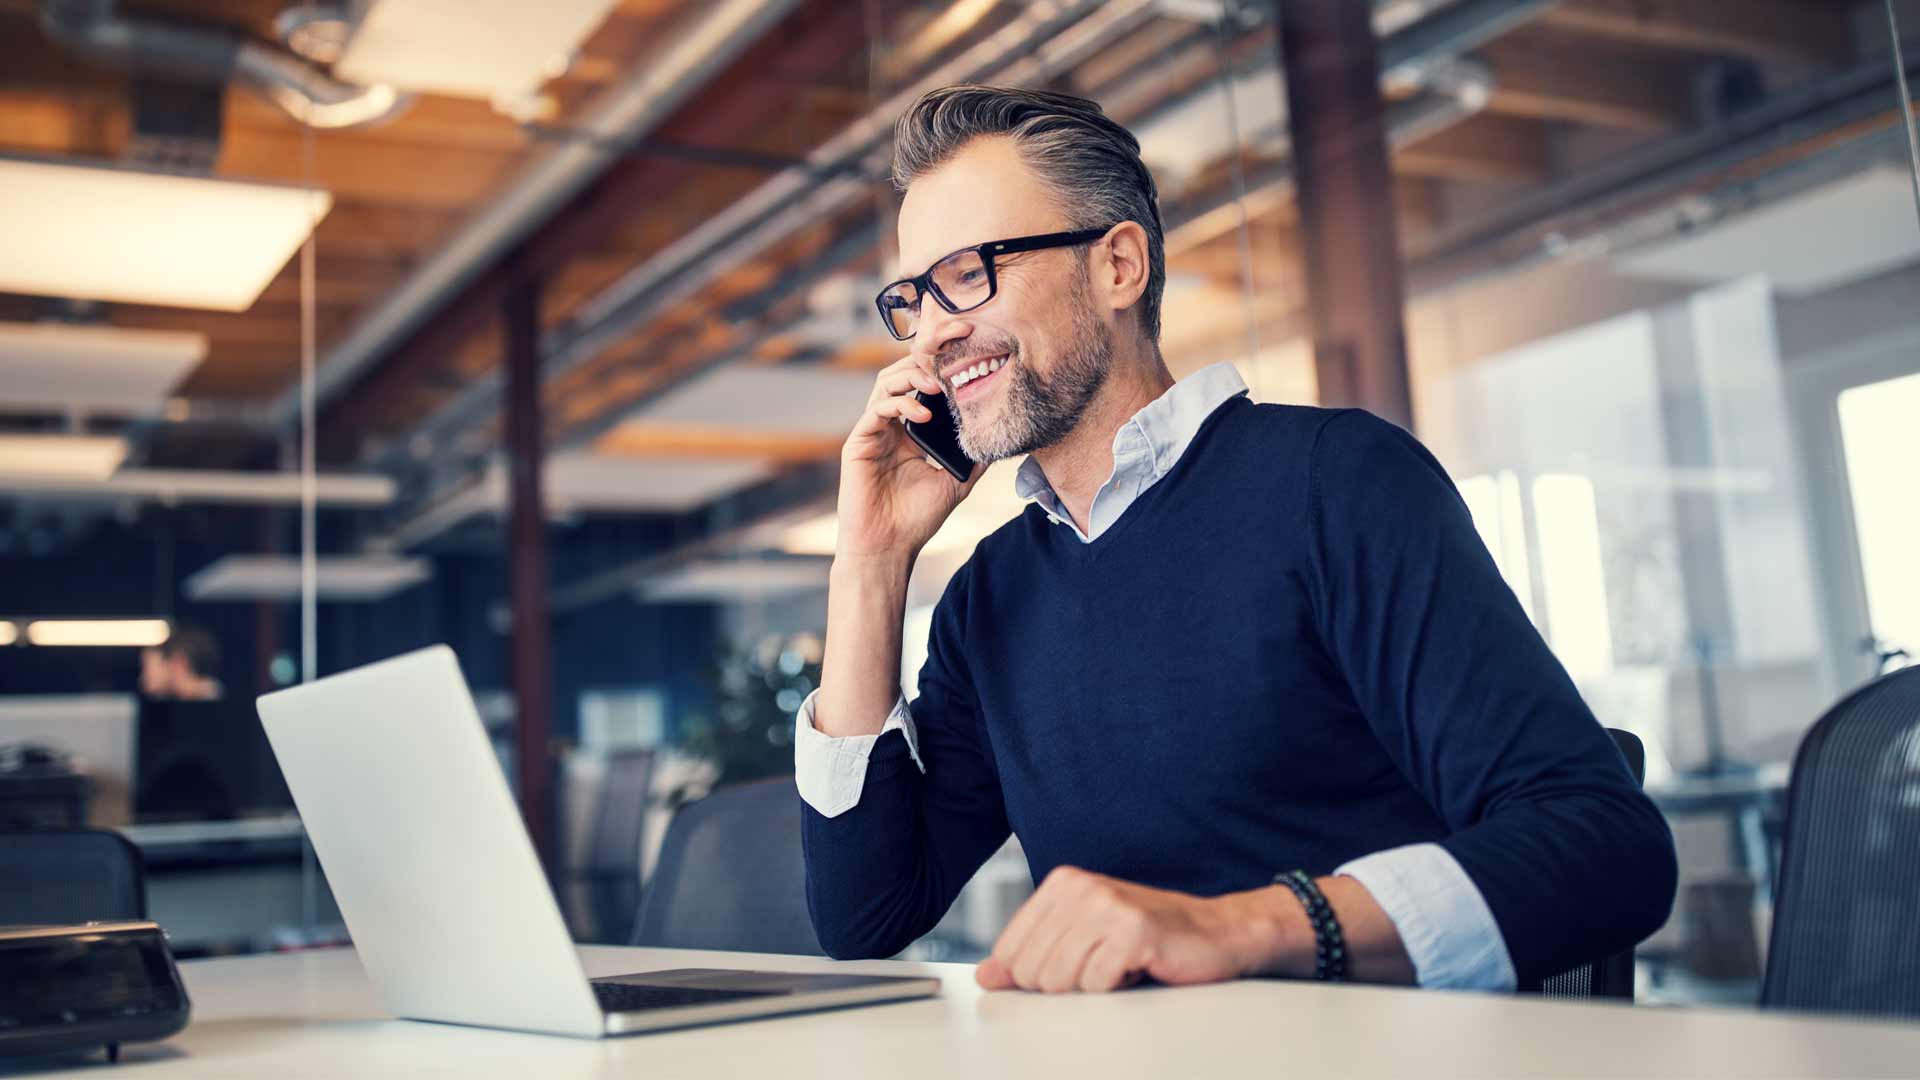 Tips for running a phone interview.